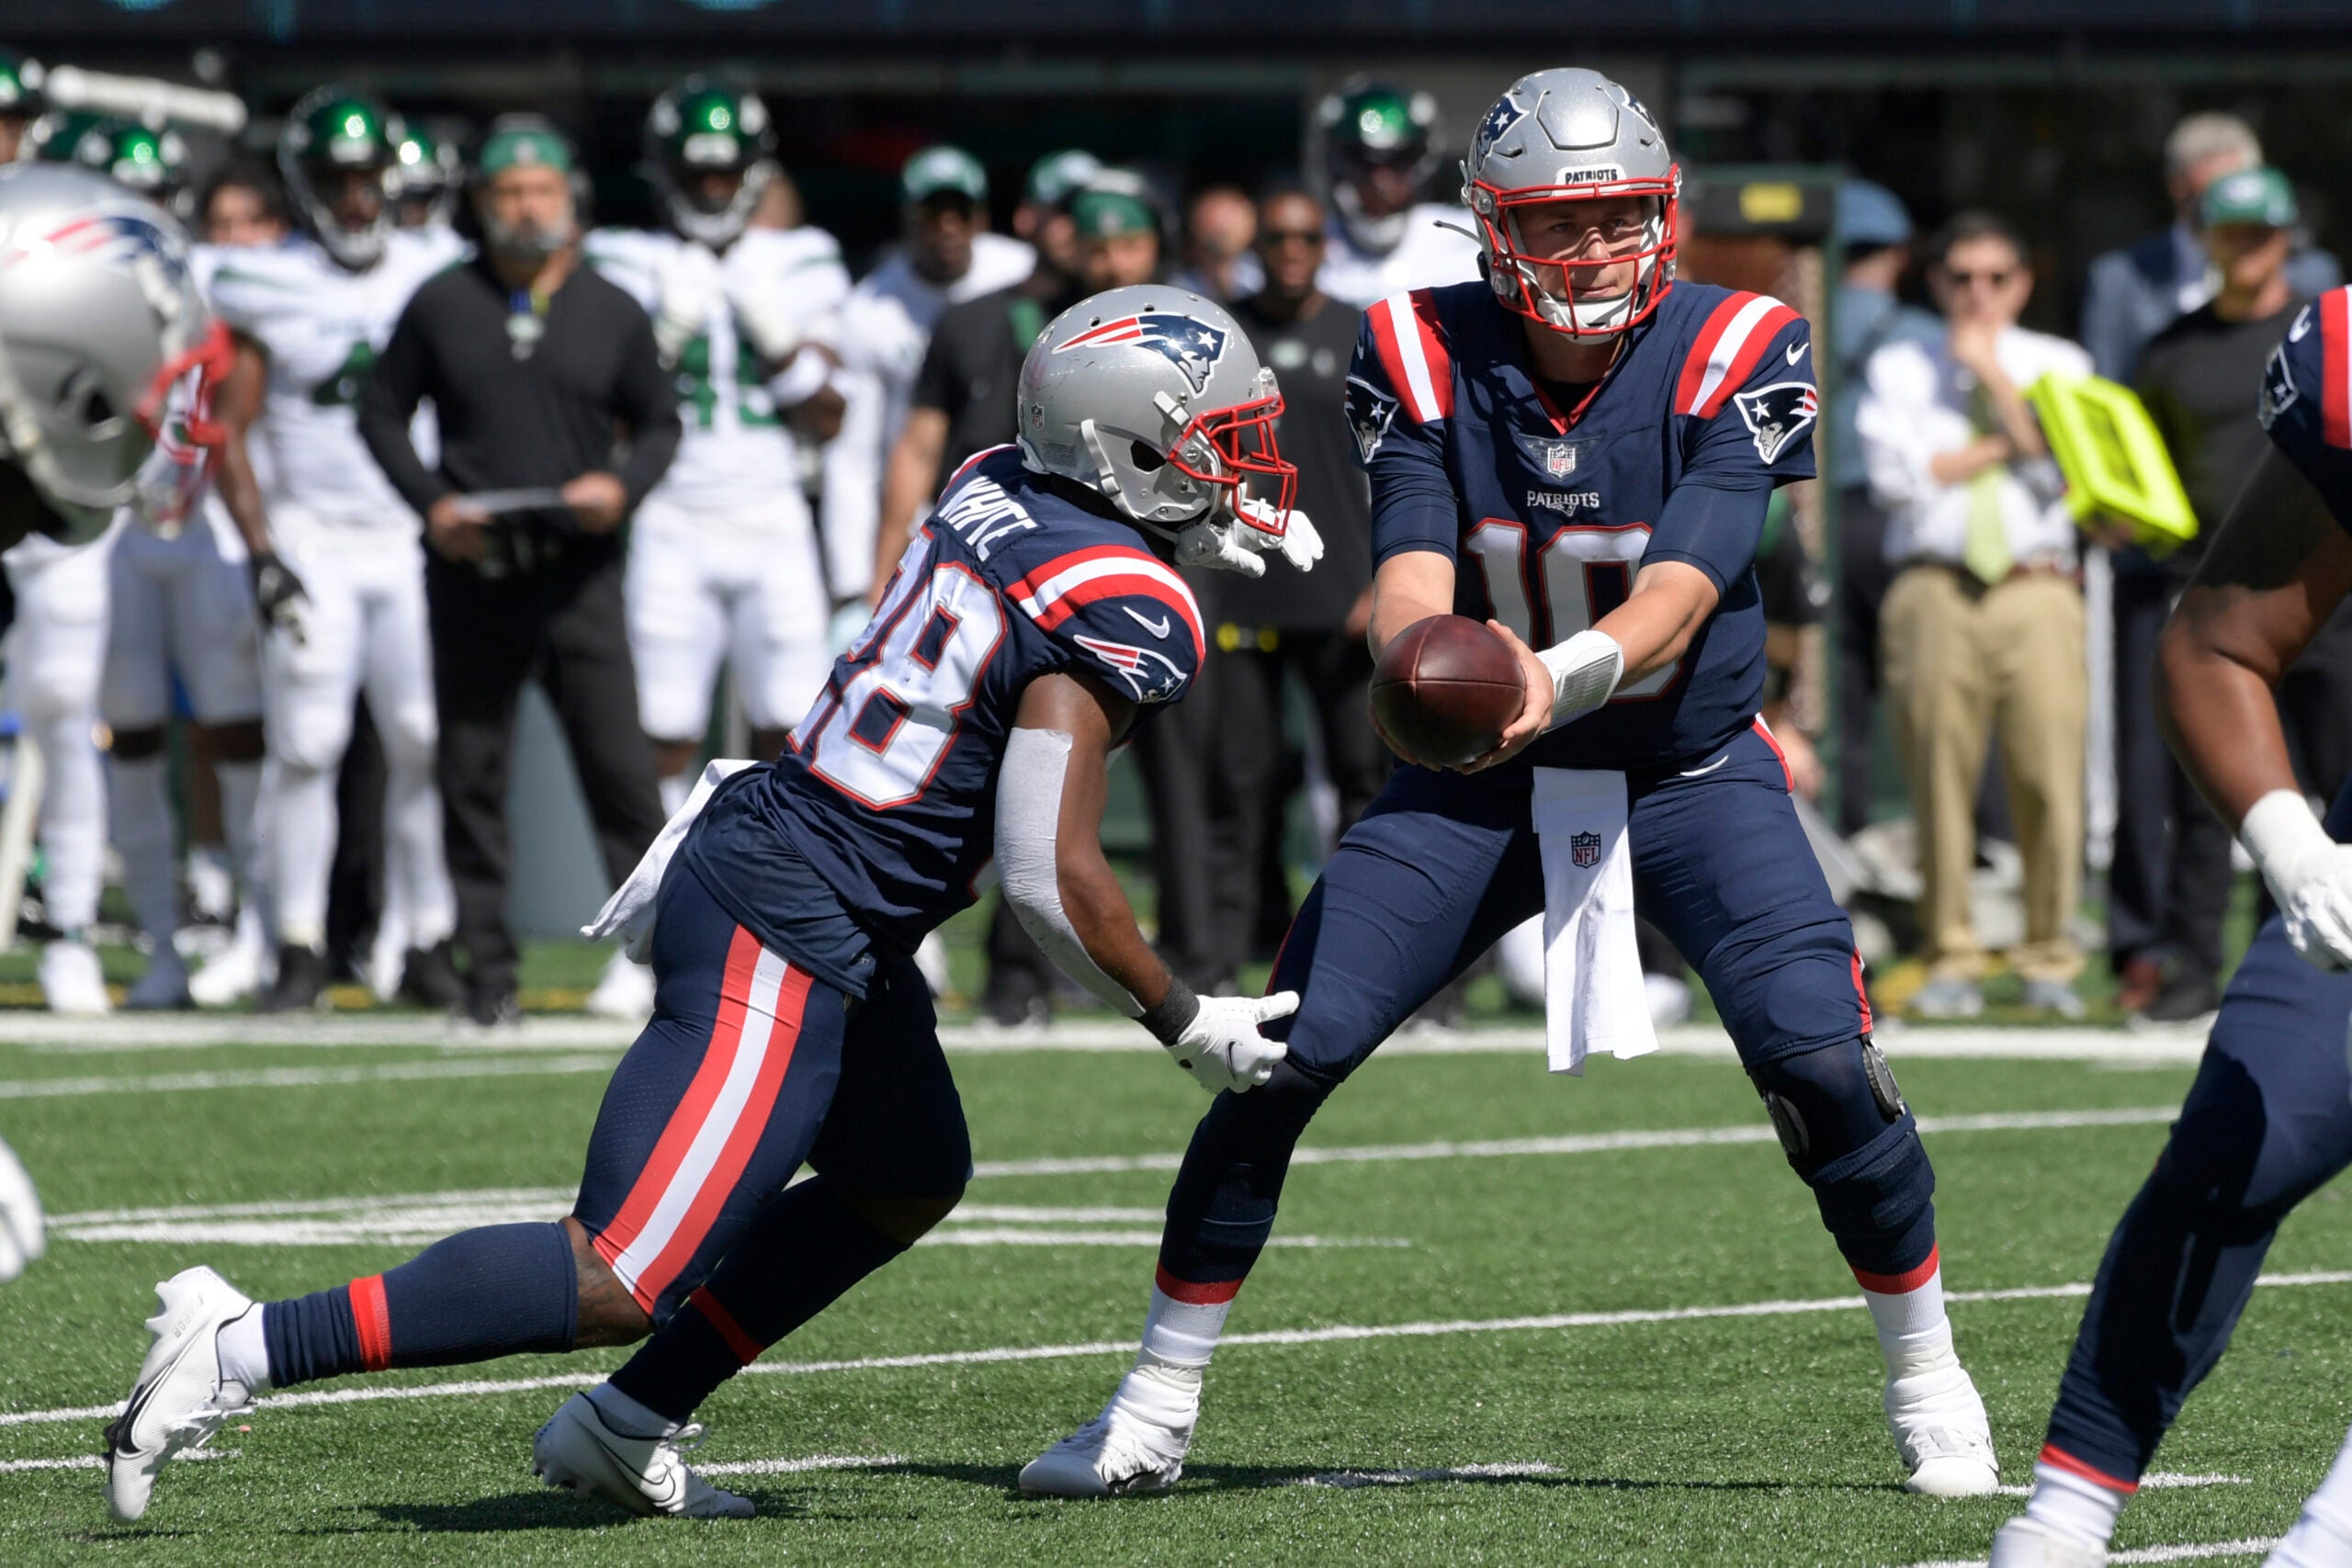 New England Patriots quarterback Mac Jones, right, hands off to James White during the first half of an NFL football game against the New York Jets, Sunday, Sept. 19, 2021, in East Rutherford, N.J.